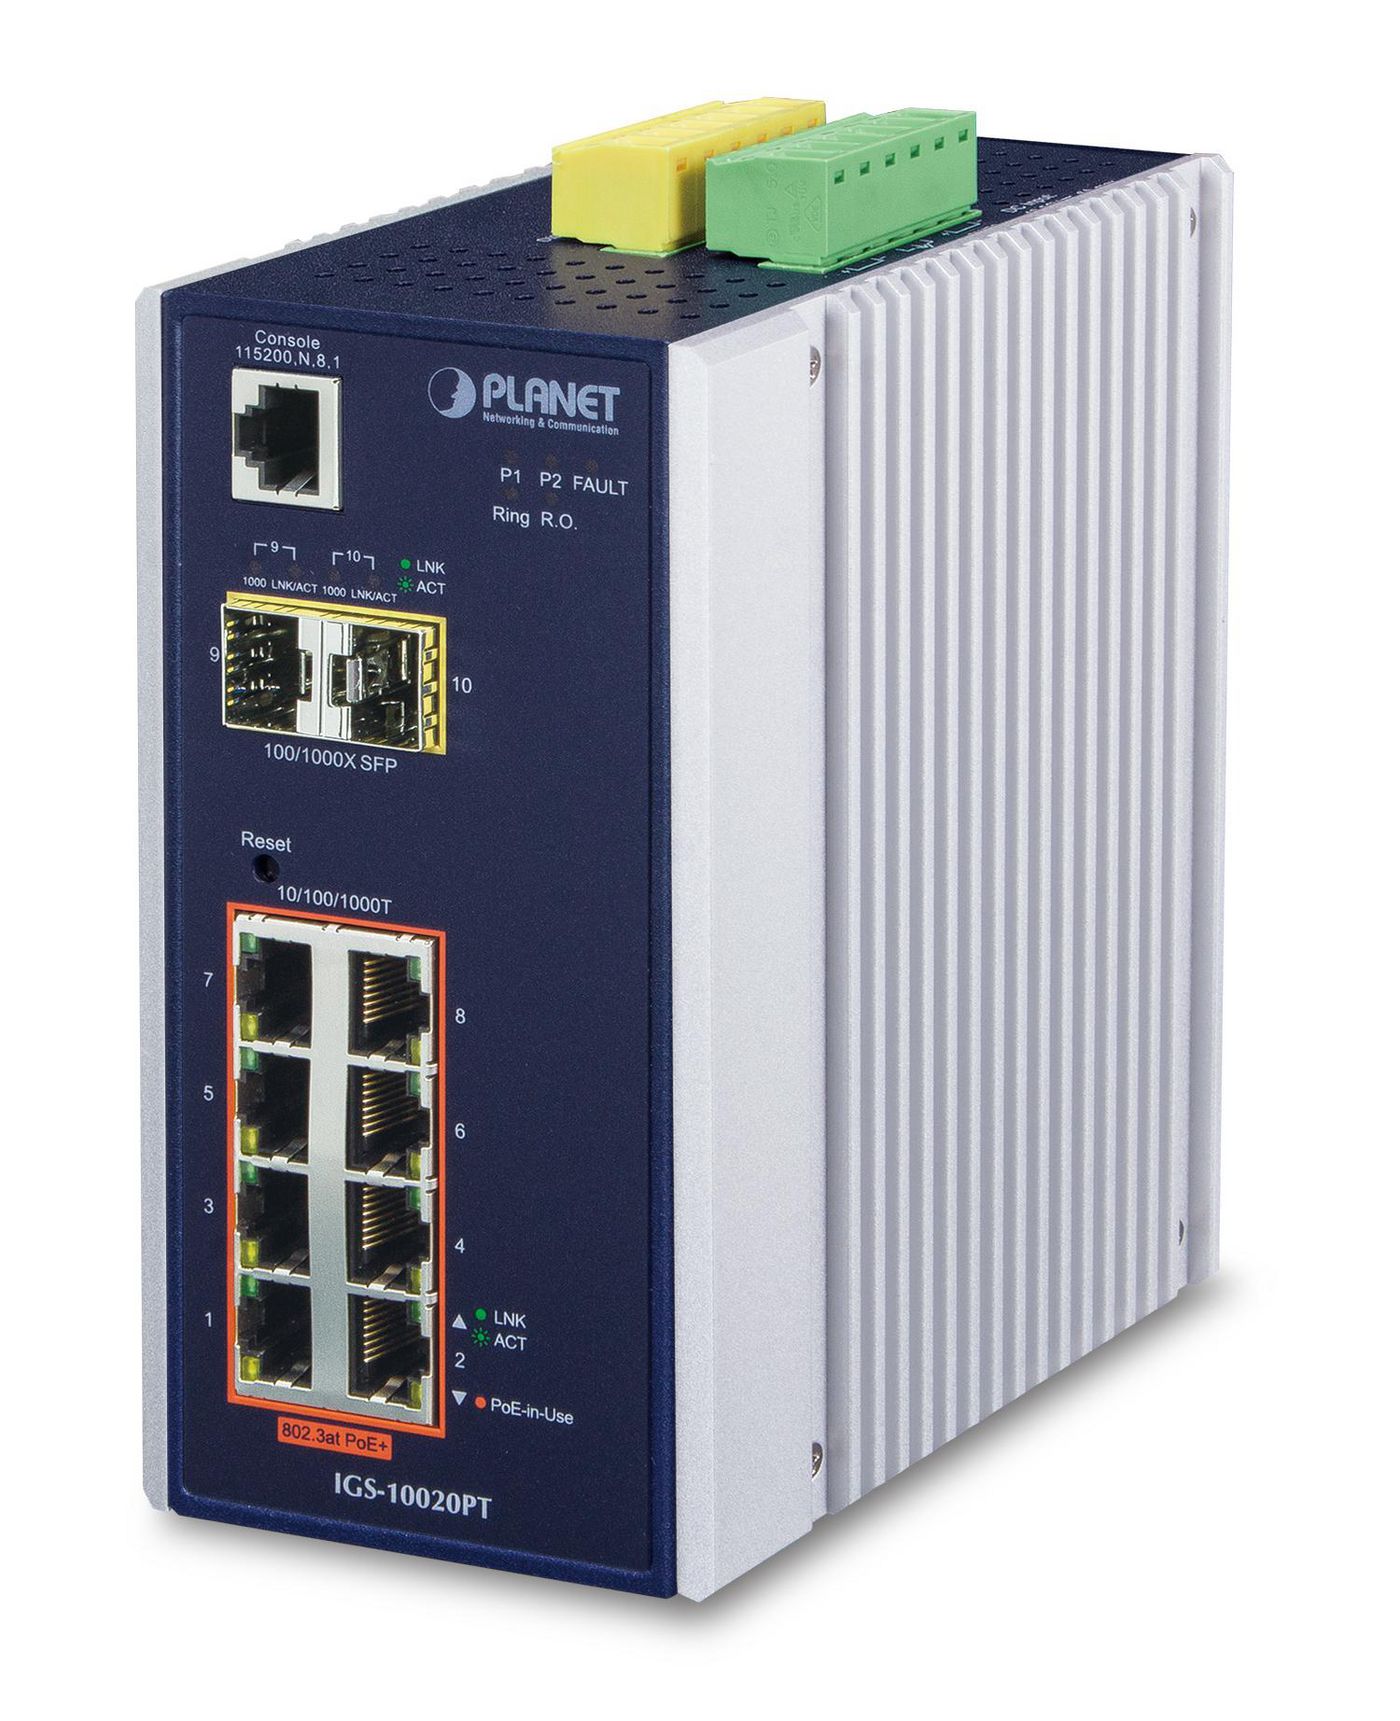 Planet IGS-10020PT IP30 L2+ SNMP Manageable 